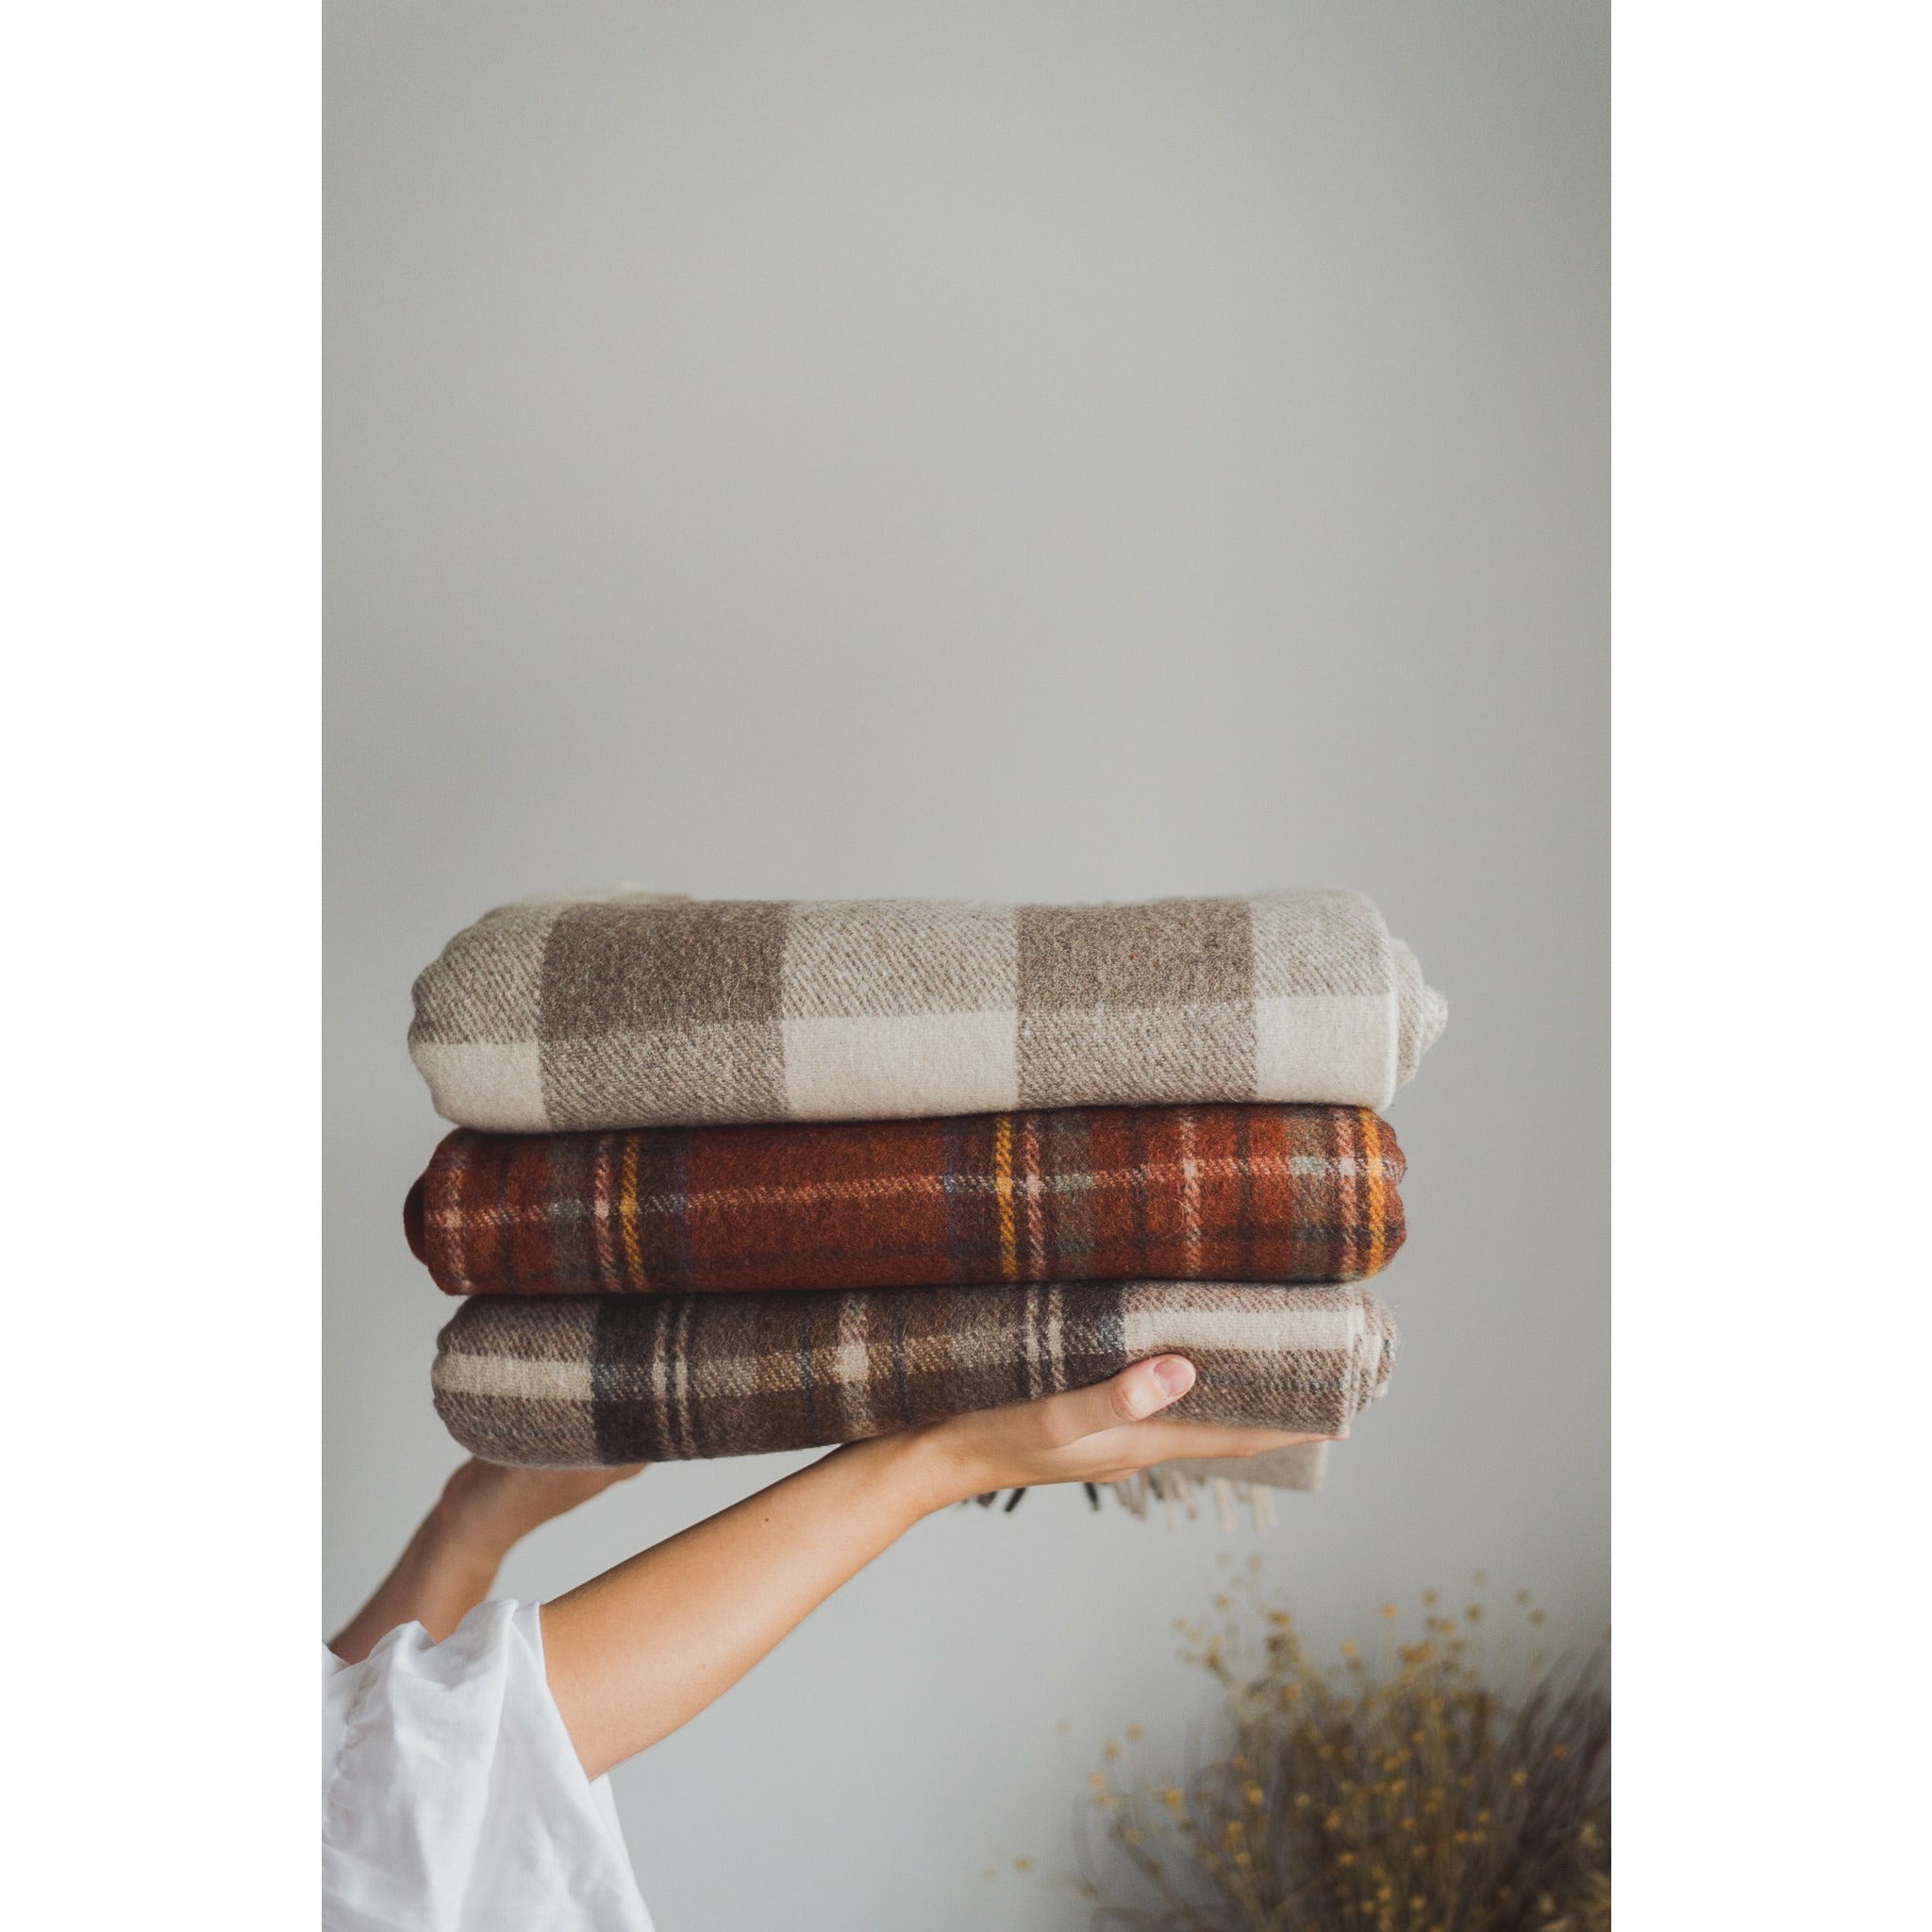 Deep Red Plaid, Cream Buffalo Check, and Brown Plaid Blanket made from recycled wool and recycled fibres. Eco-friendly wool blanket that is machine washable. Tartan Blanket Co. Festive Plaid Blanket